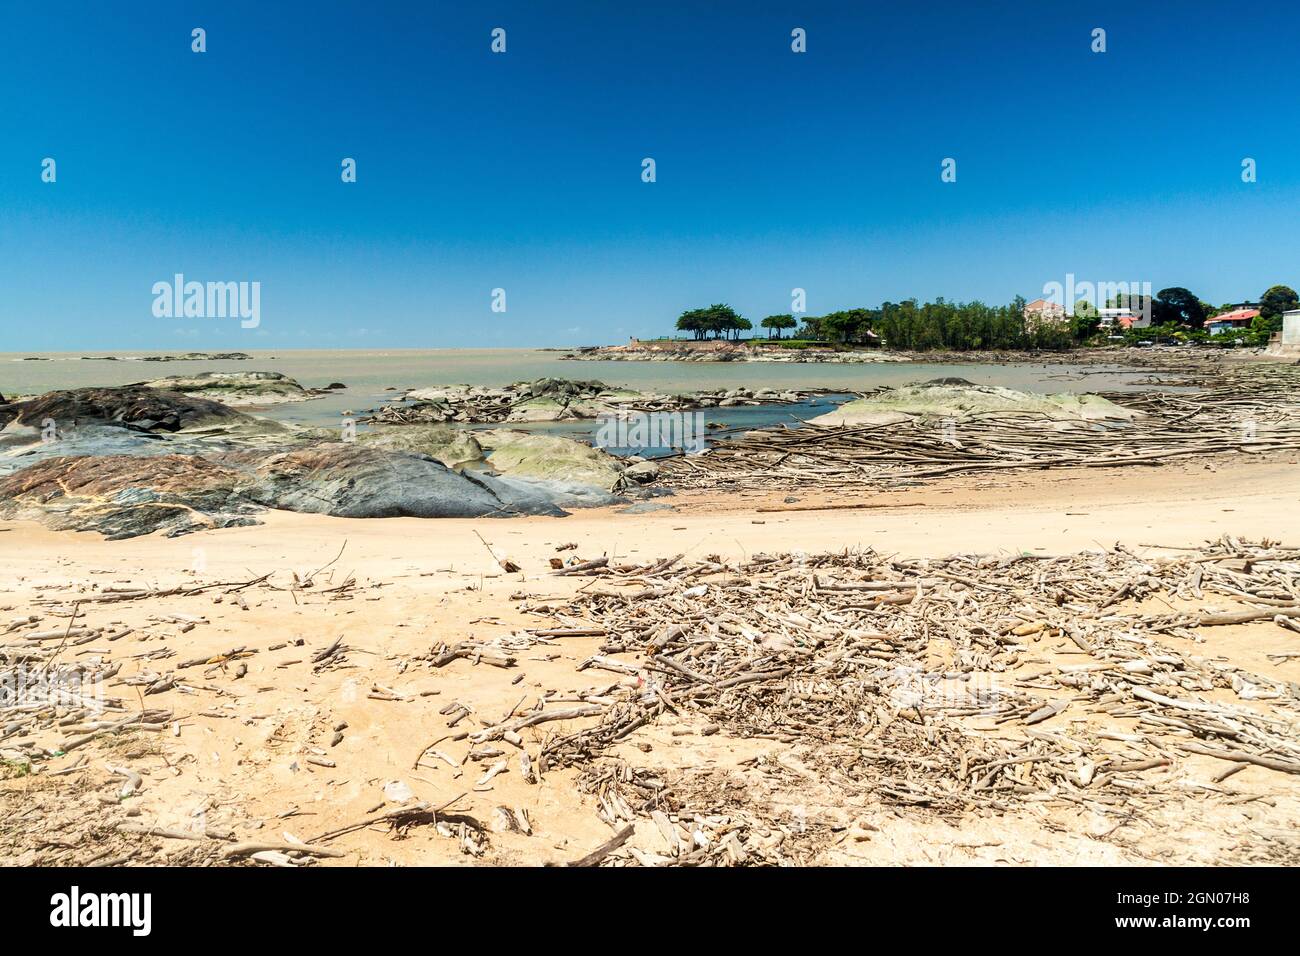 Sea in Cayenne, capital of French Guiana, during the low tide. Stock Photo